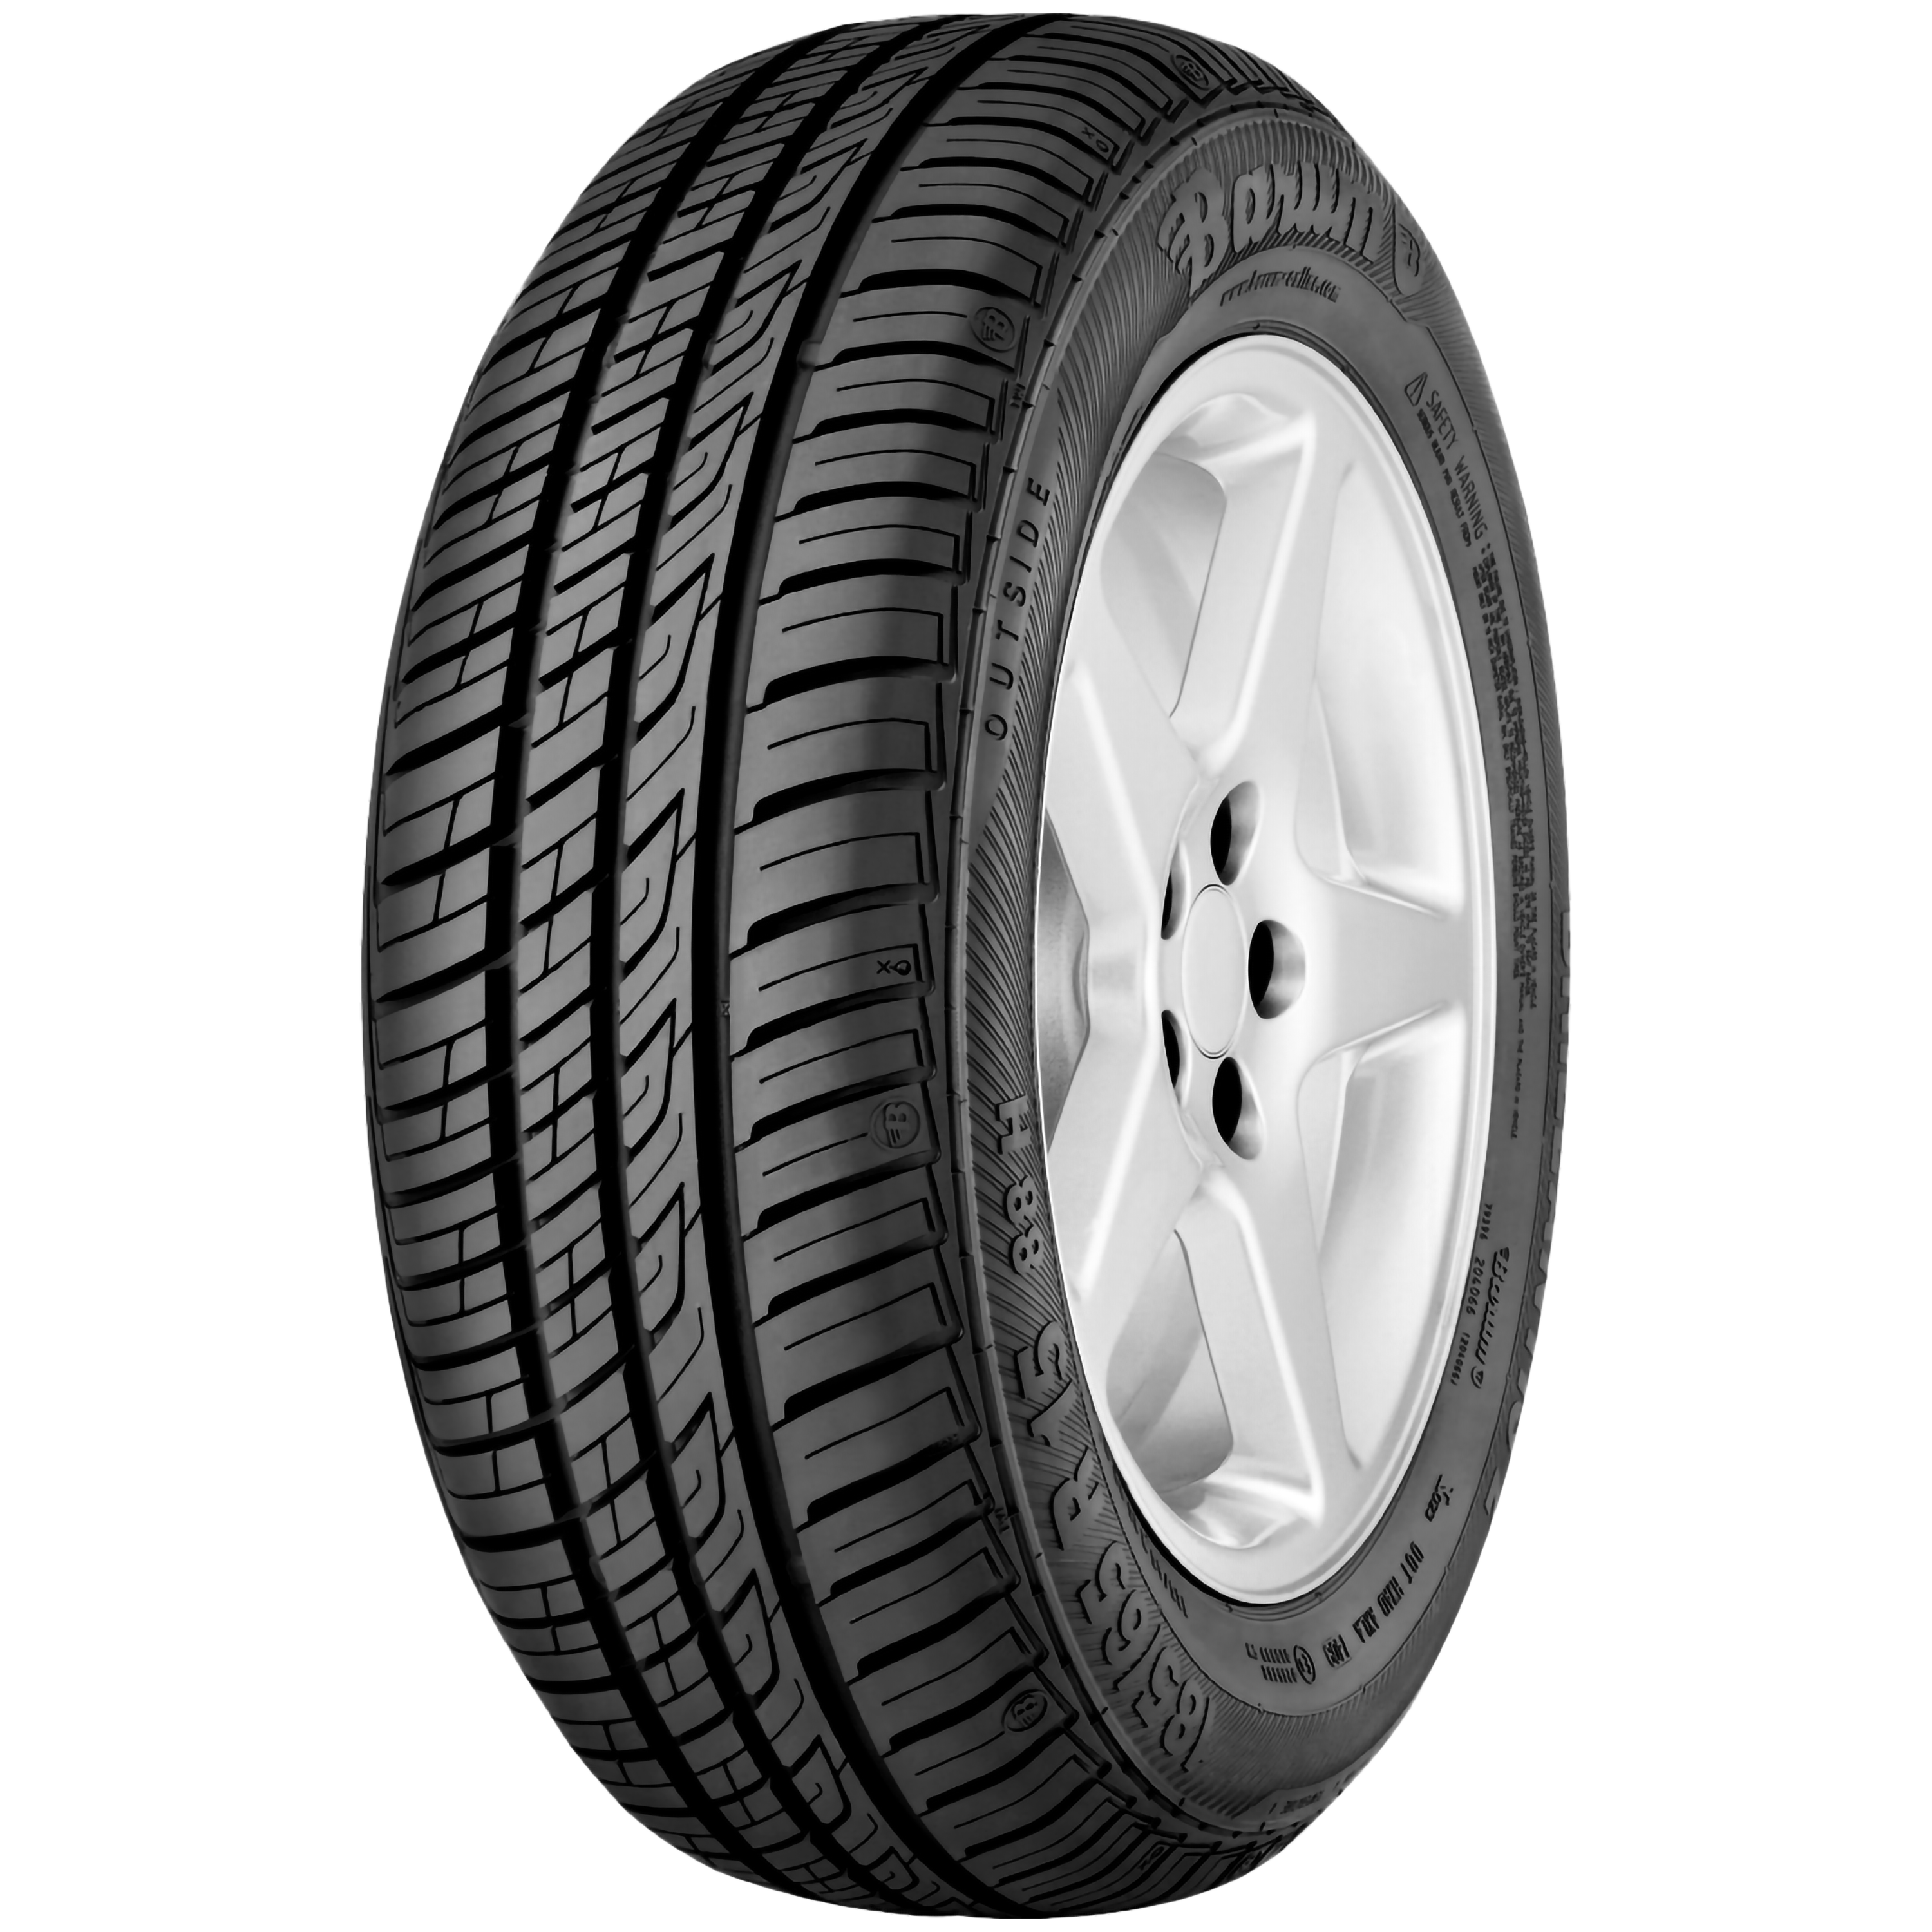 Barum Brillantis 2 - The long life summer tyre for your car & SUV with high  mileage | Barum